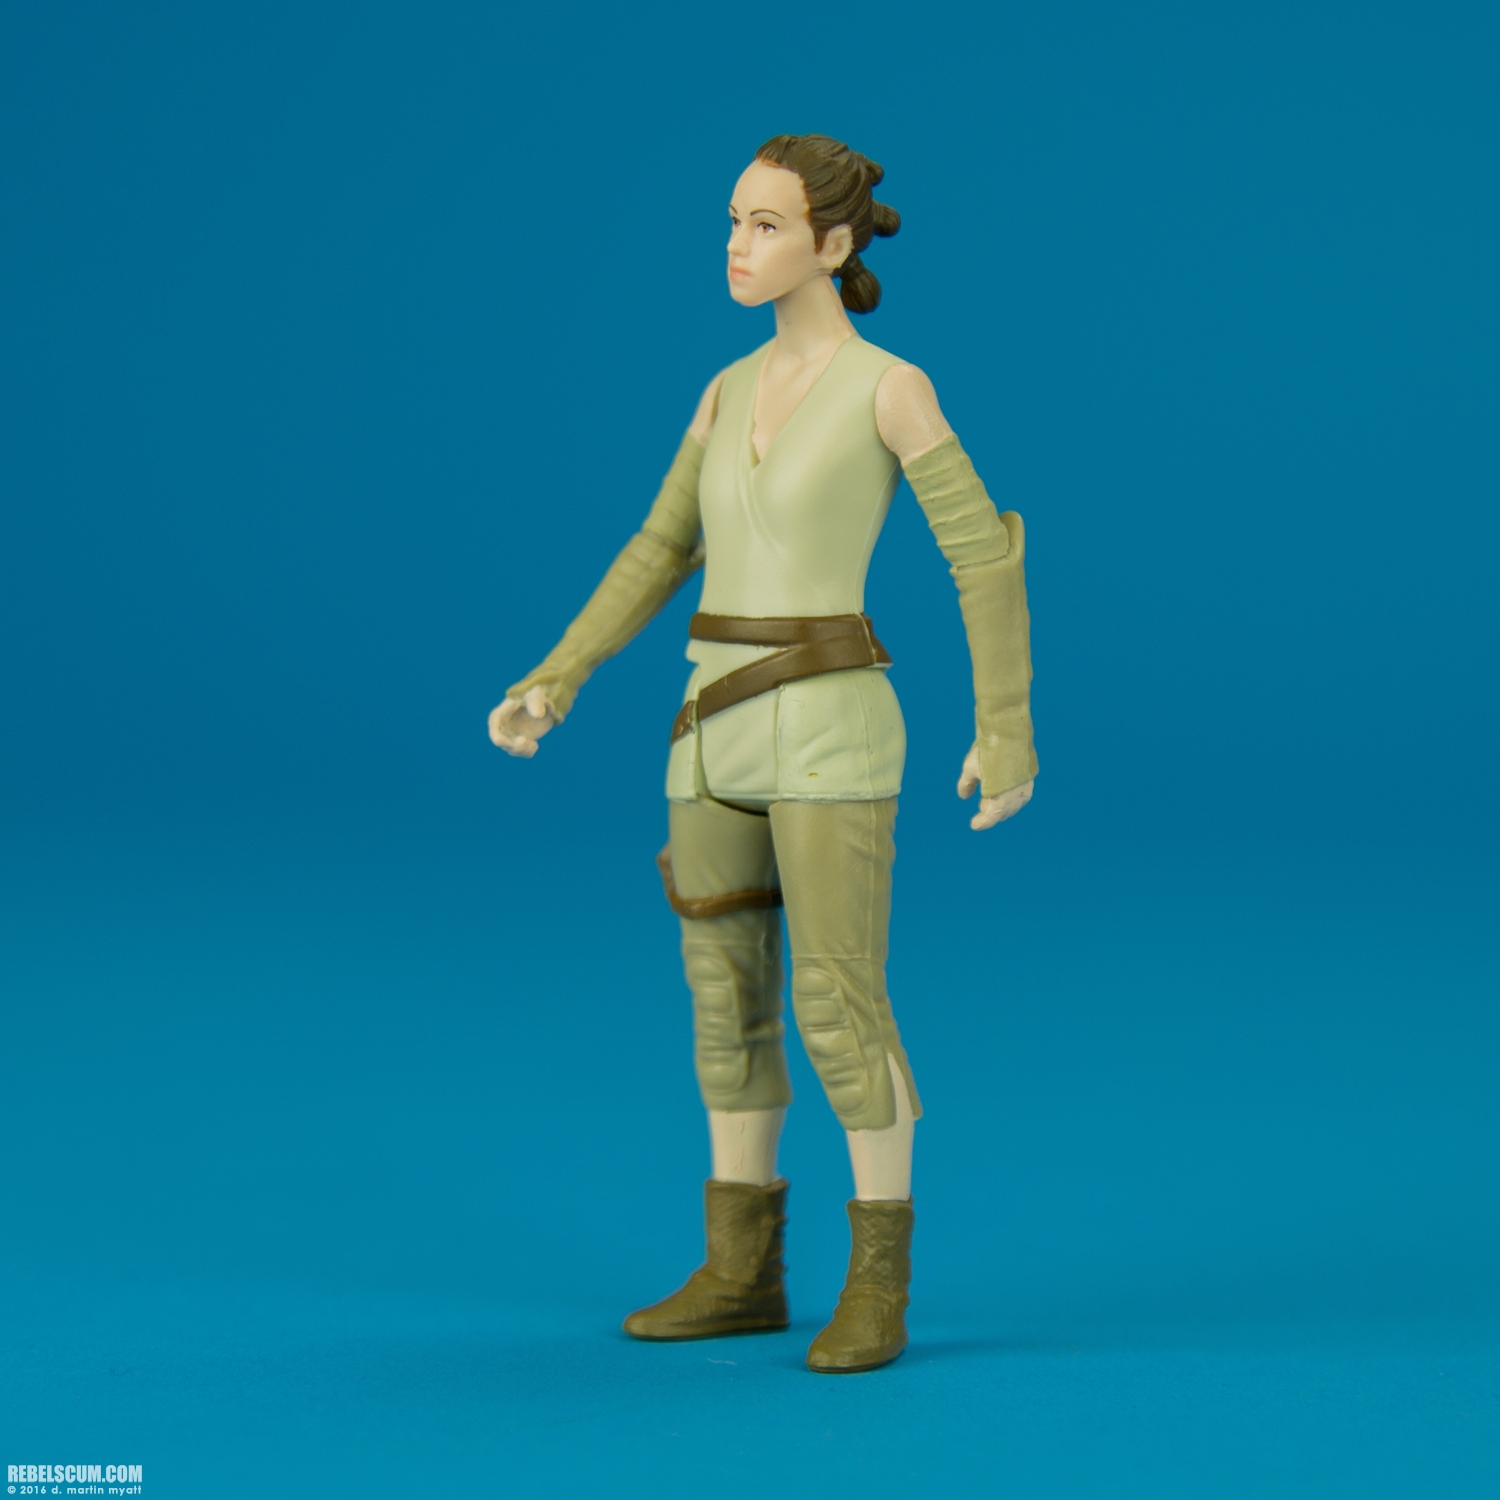 Rey-Resistance-Outfit-The-Force-Awakens-2016-Hasbro-007.jpg